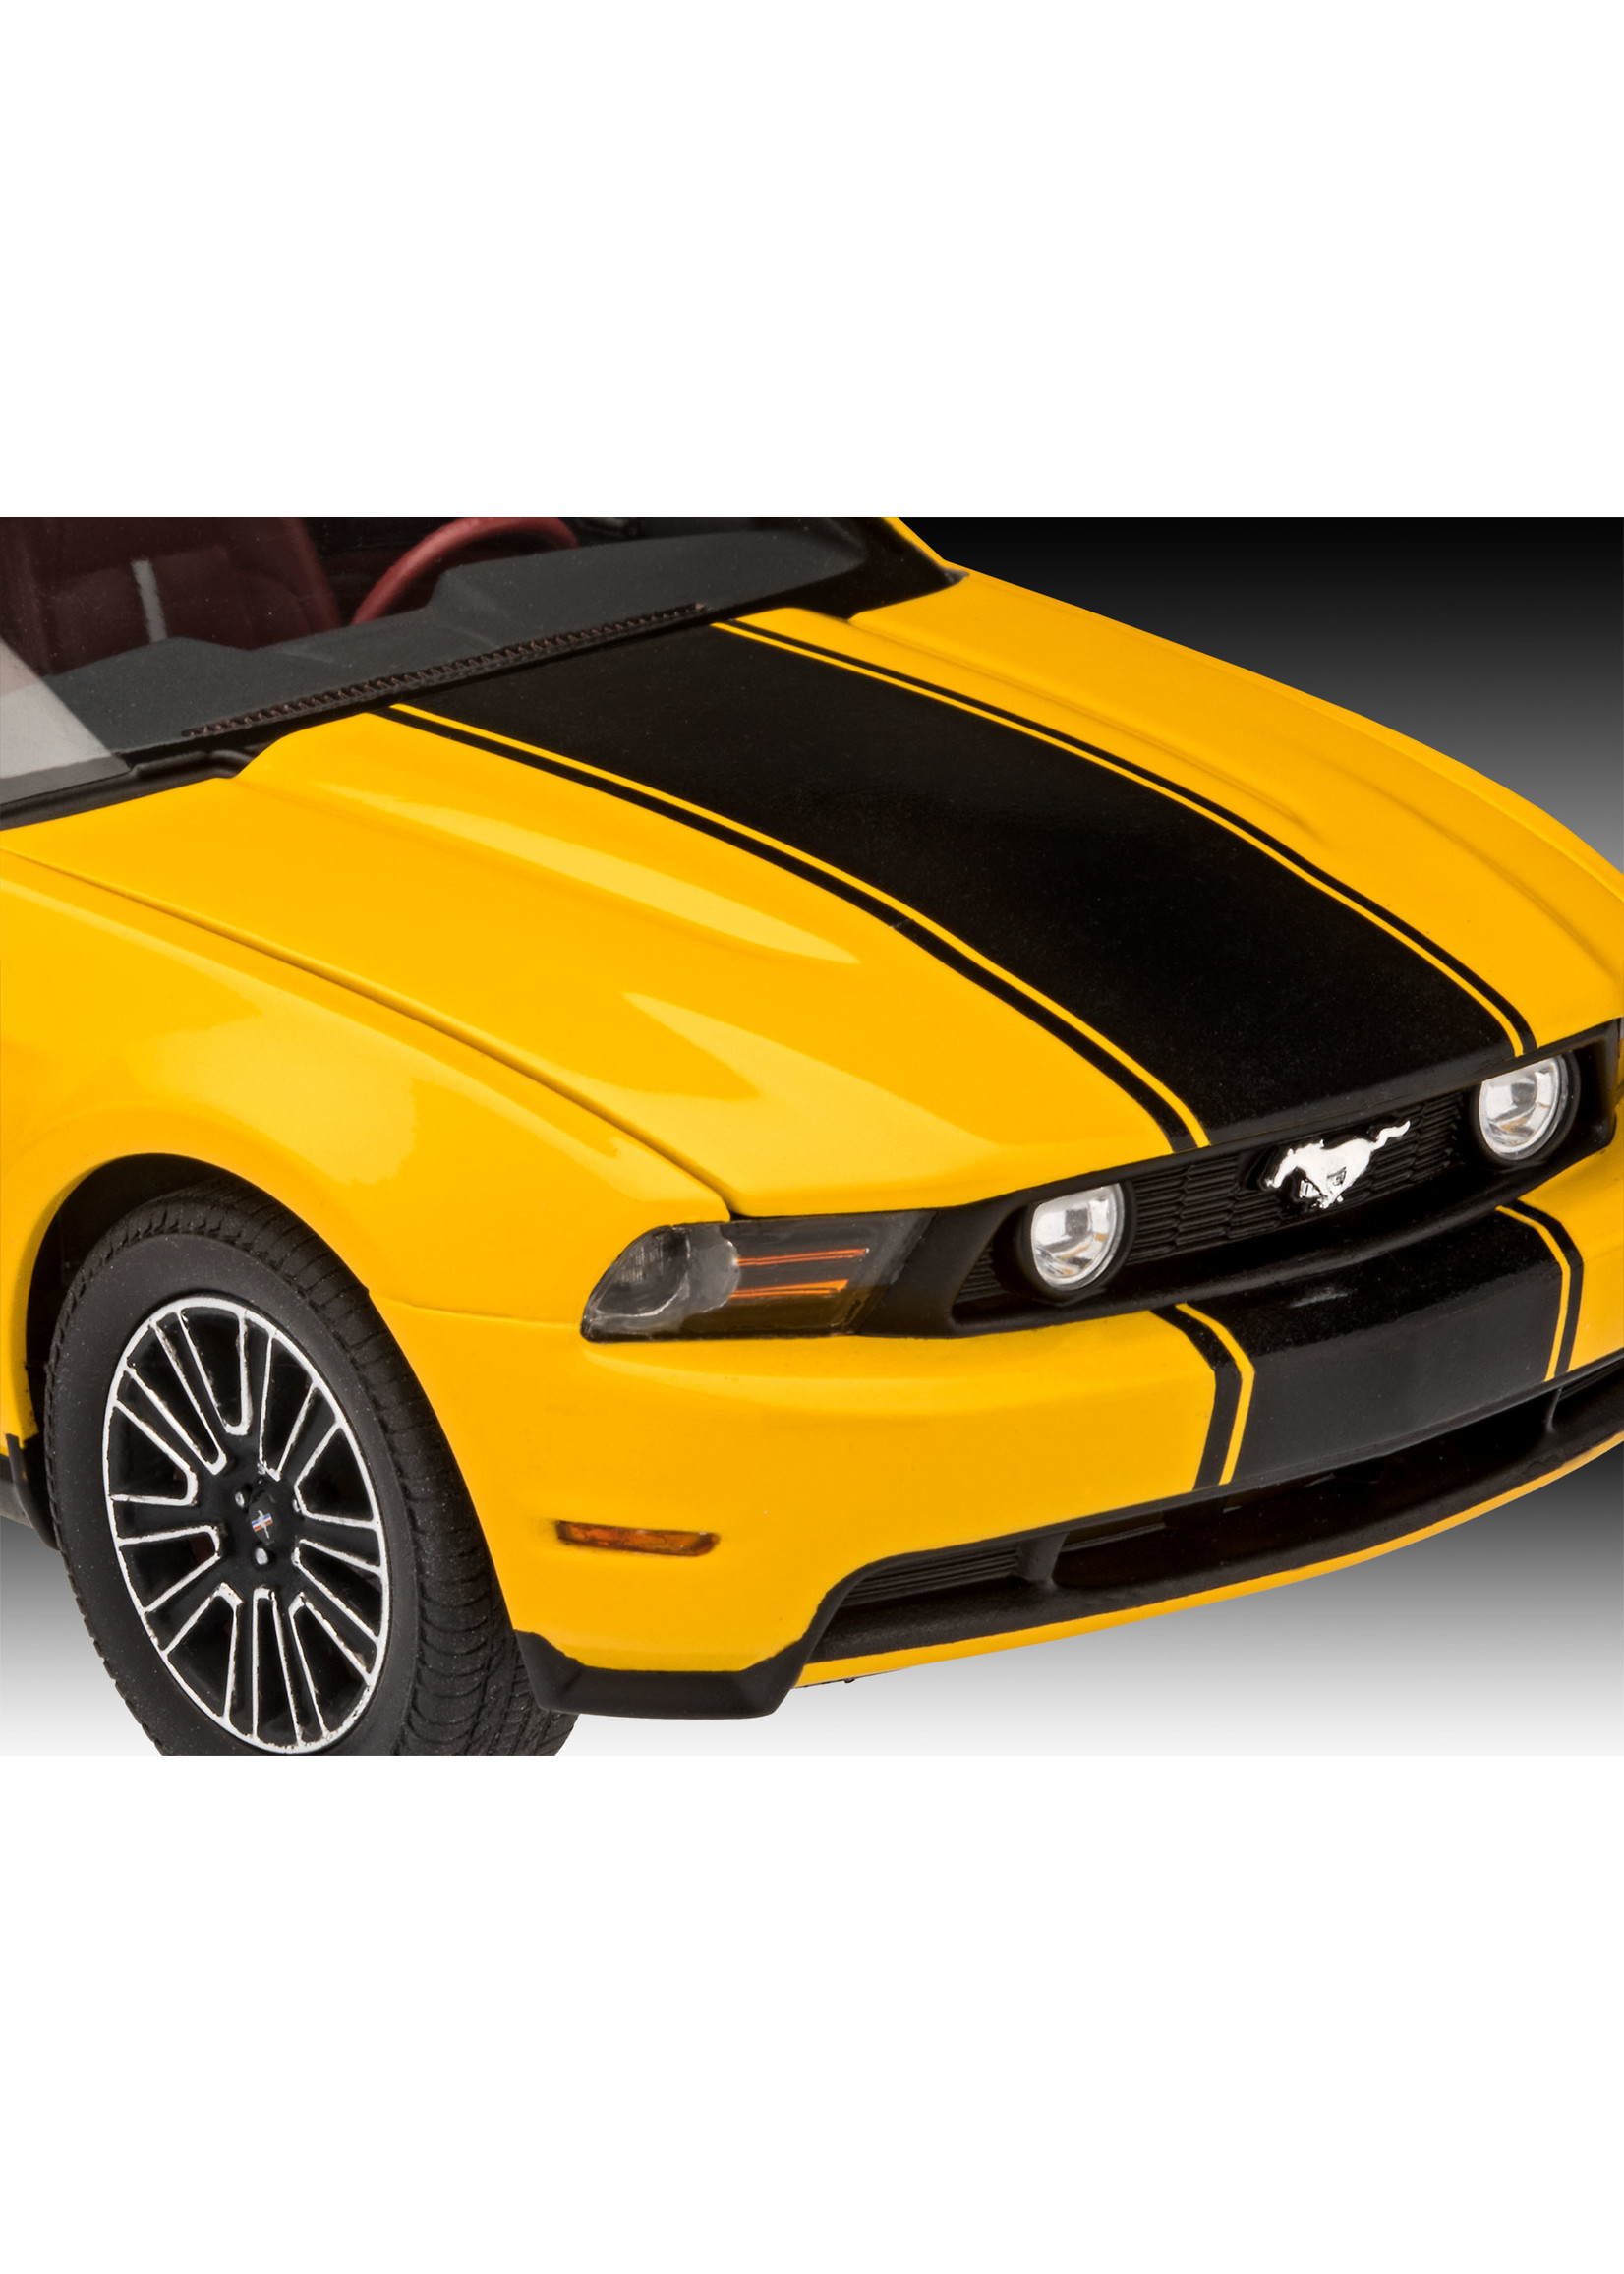 Revell of Germany 07046 - 1/25 2010 Ford Mustang GT